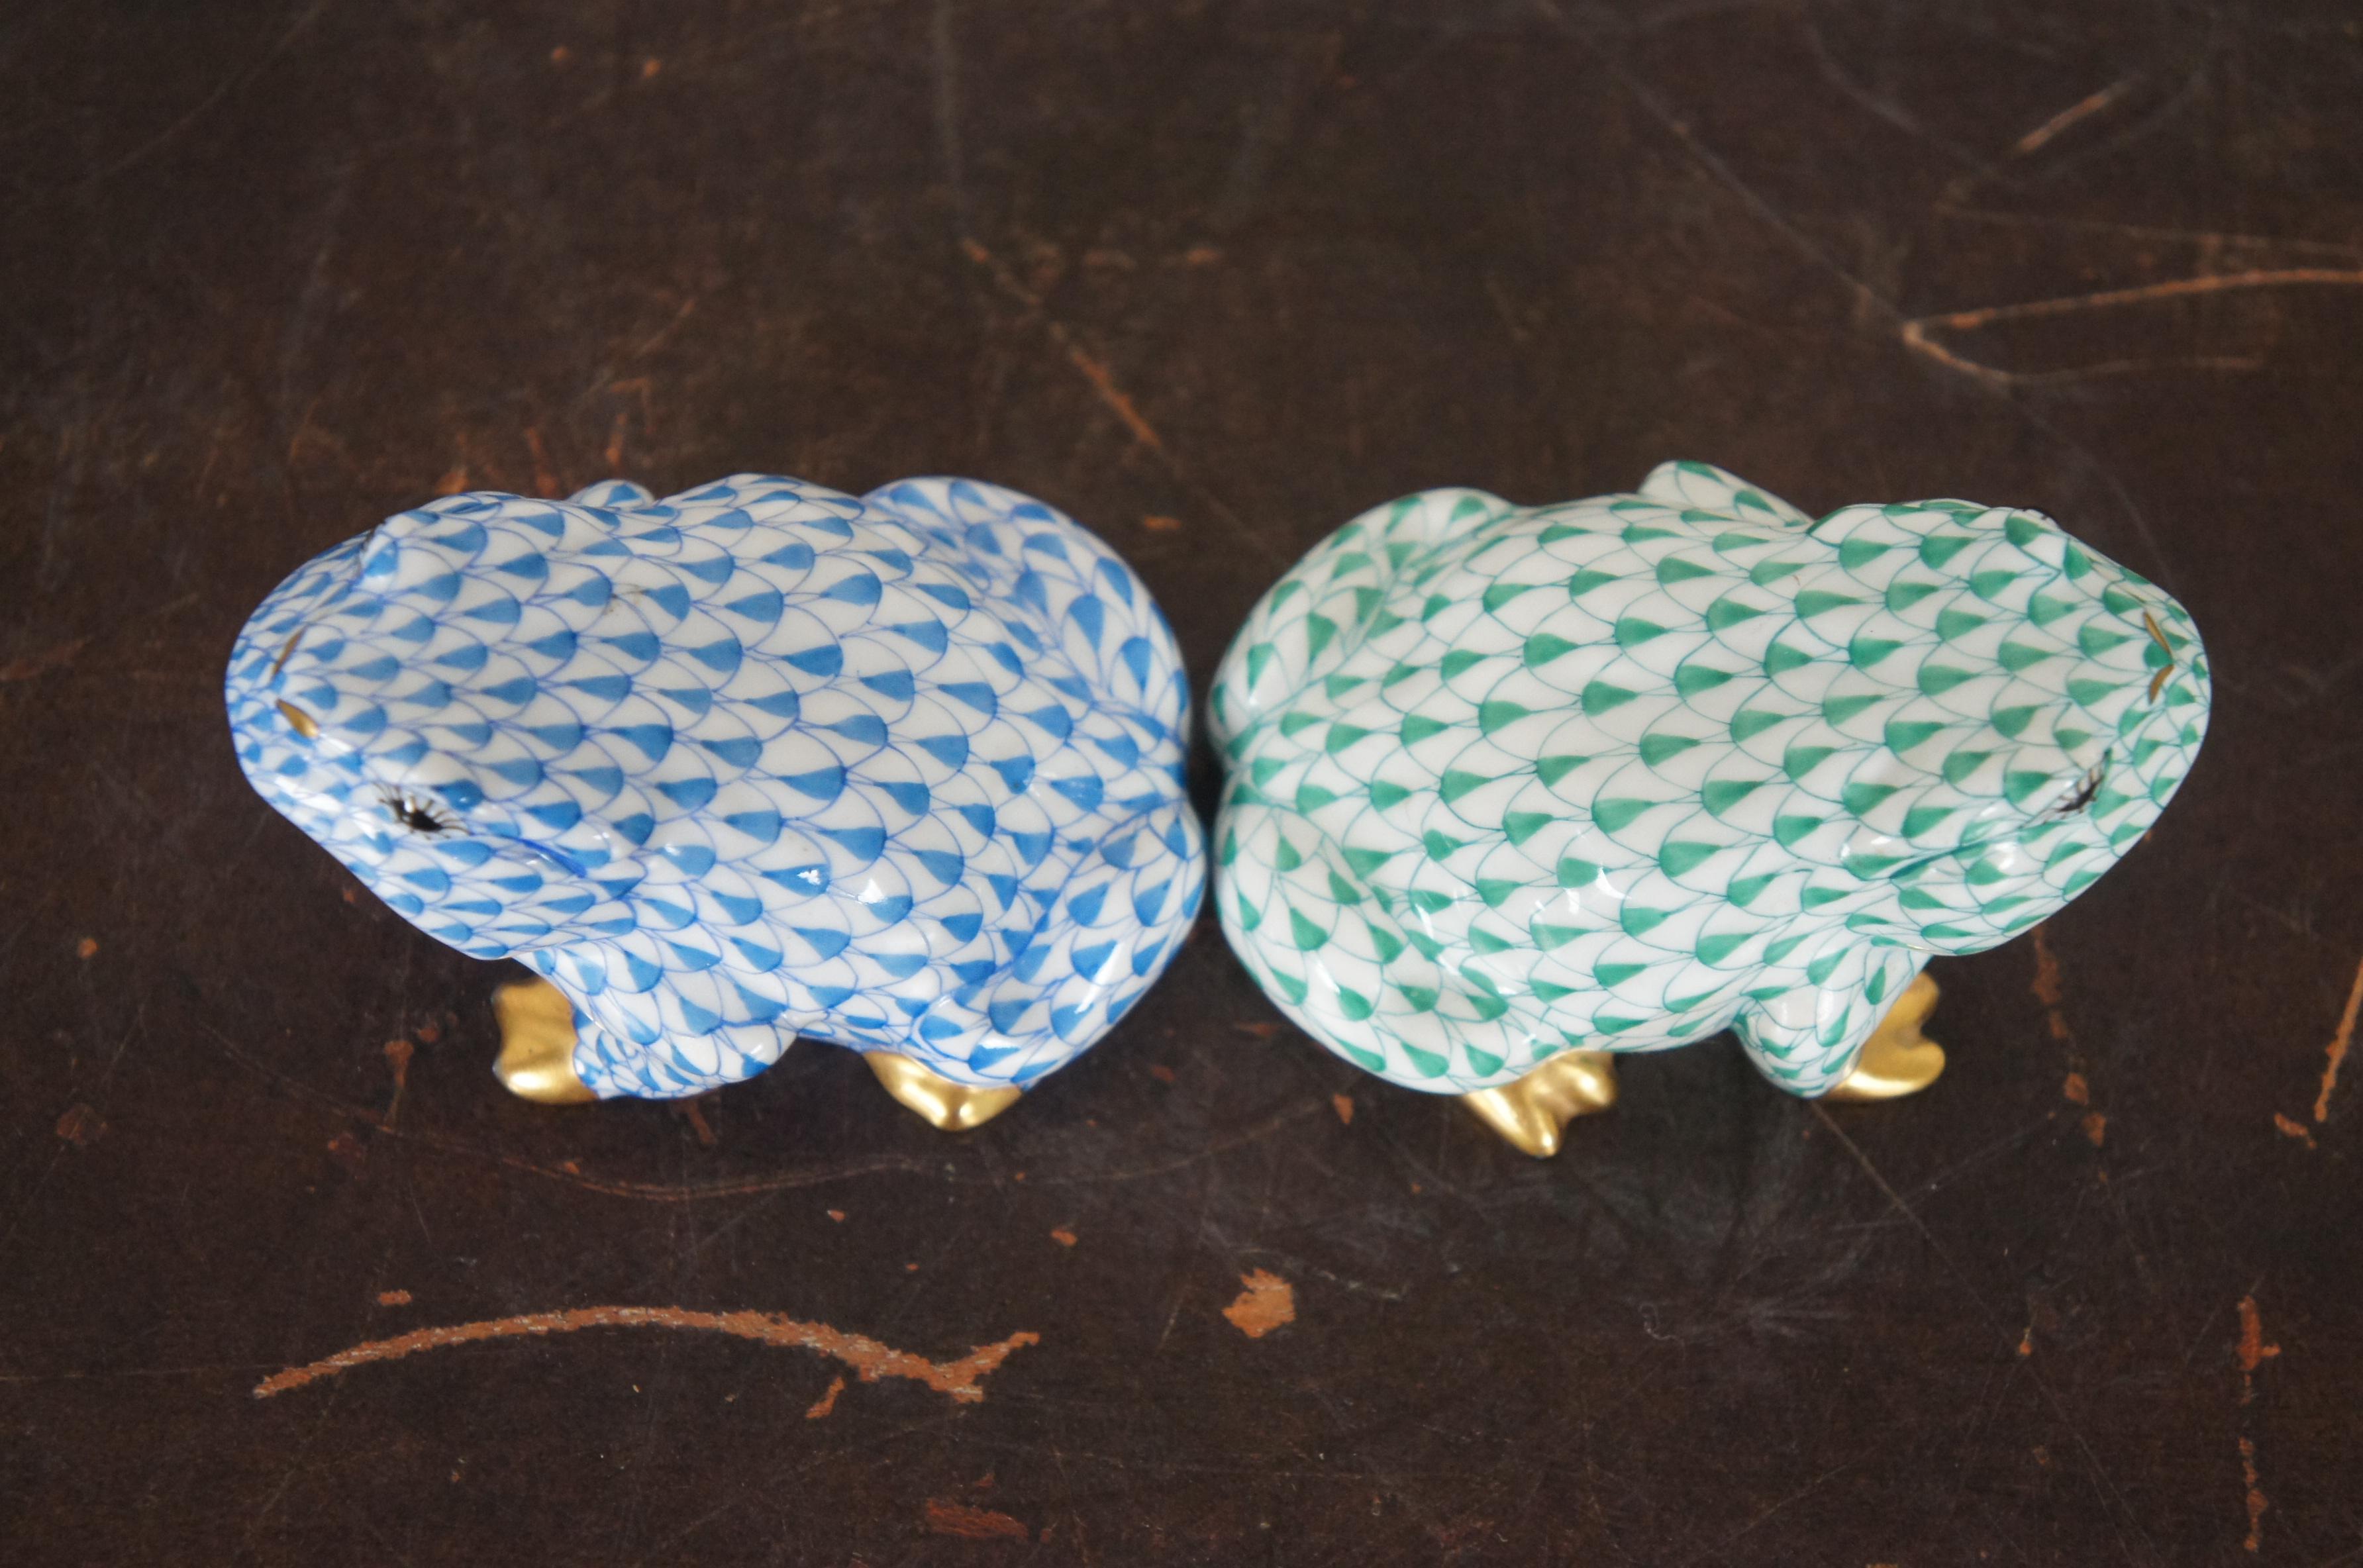 2 Herend Hungary Porcelain Fishnet Enameled Frog Todd the Toad Figurines Pair 3